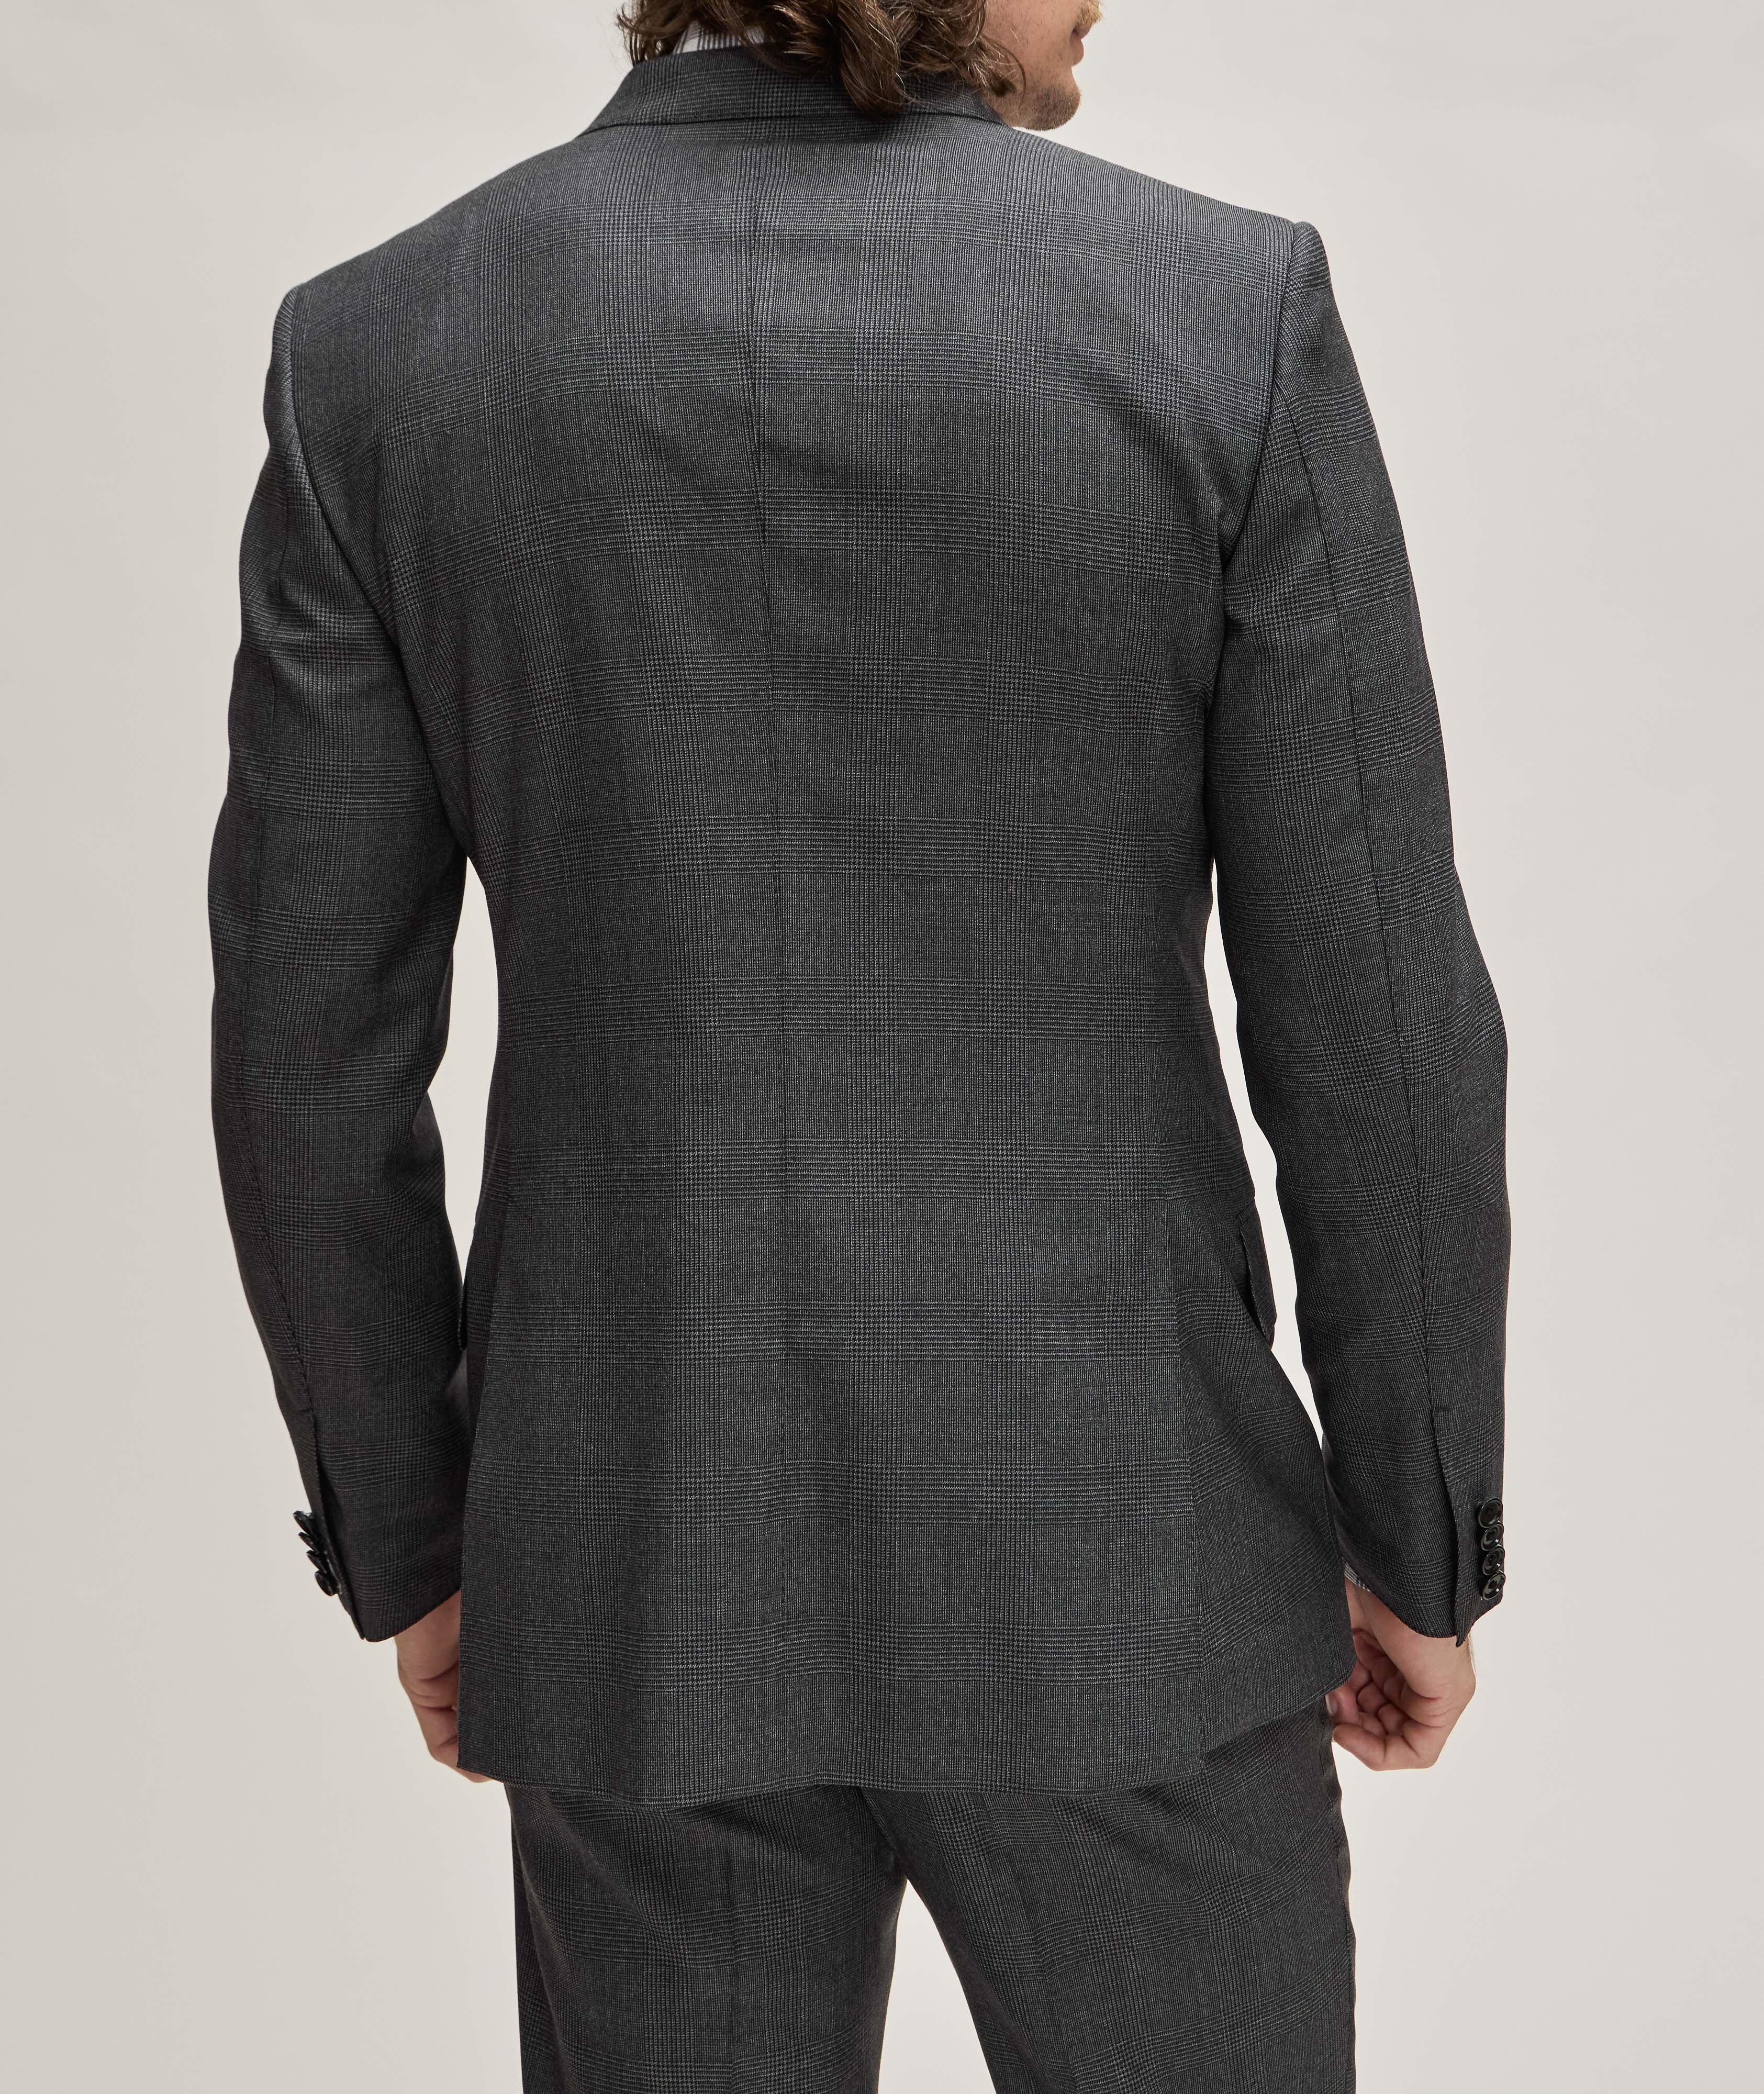 O'Connor Prince Of Wales Wool Suit image 2